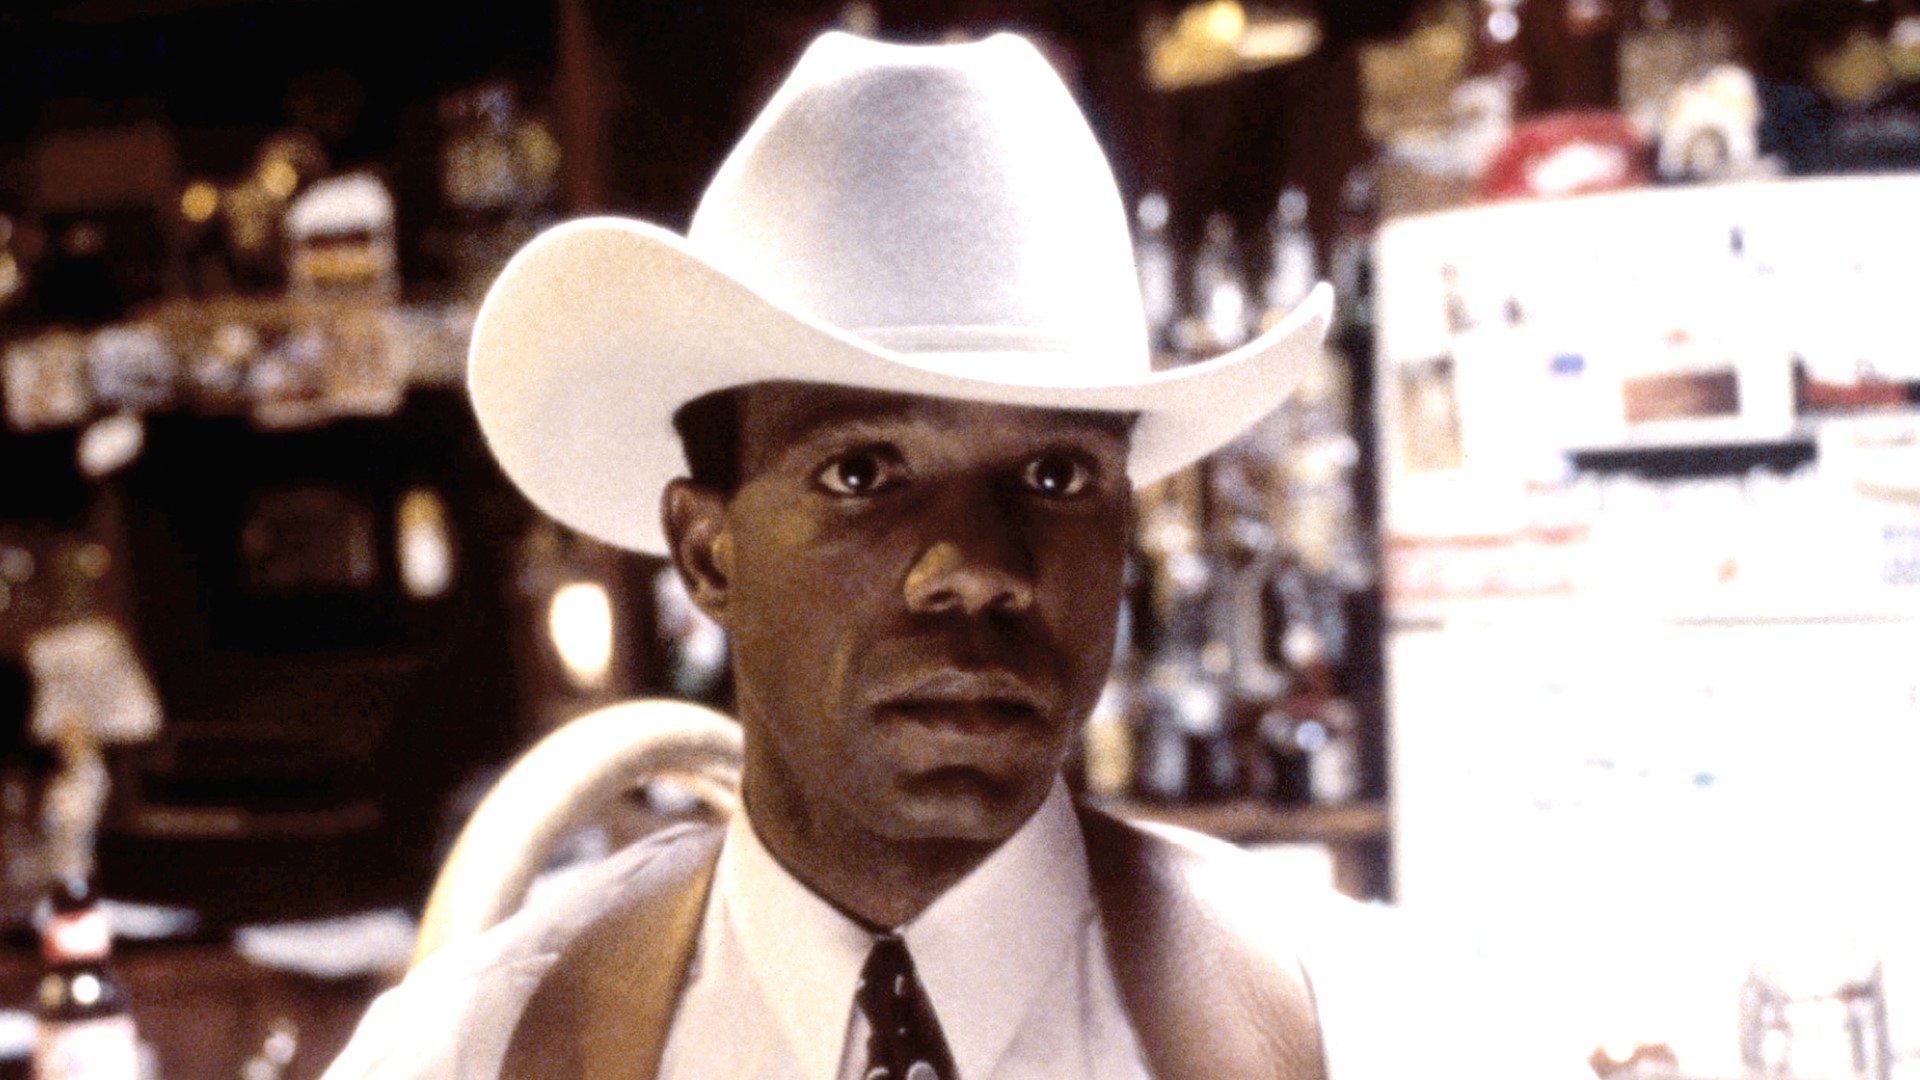 <p>As Trivette, he partnered with Cordell Walker (Chuck Norris) for no less than 196 episodes. Without playing down his other great projects, many will remember Clarence Gilyard most of all for his leading role in this Texan police drama.</p> <p>Image: CBS</p>